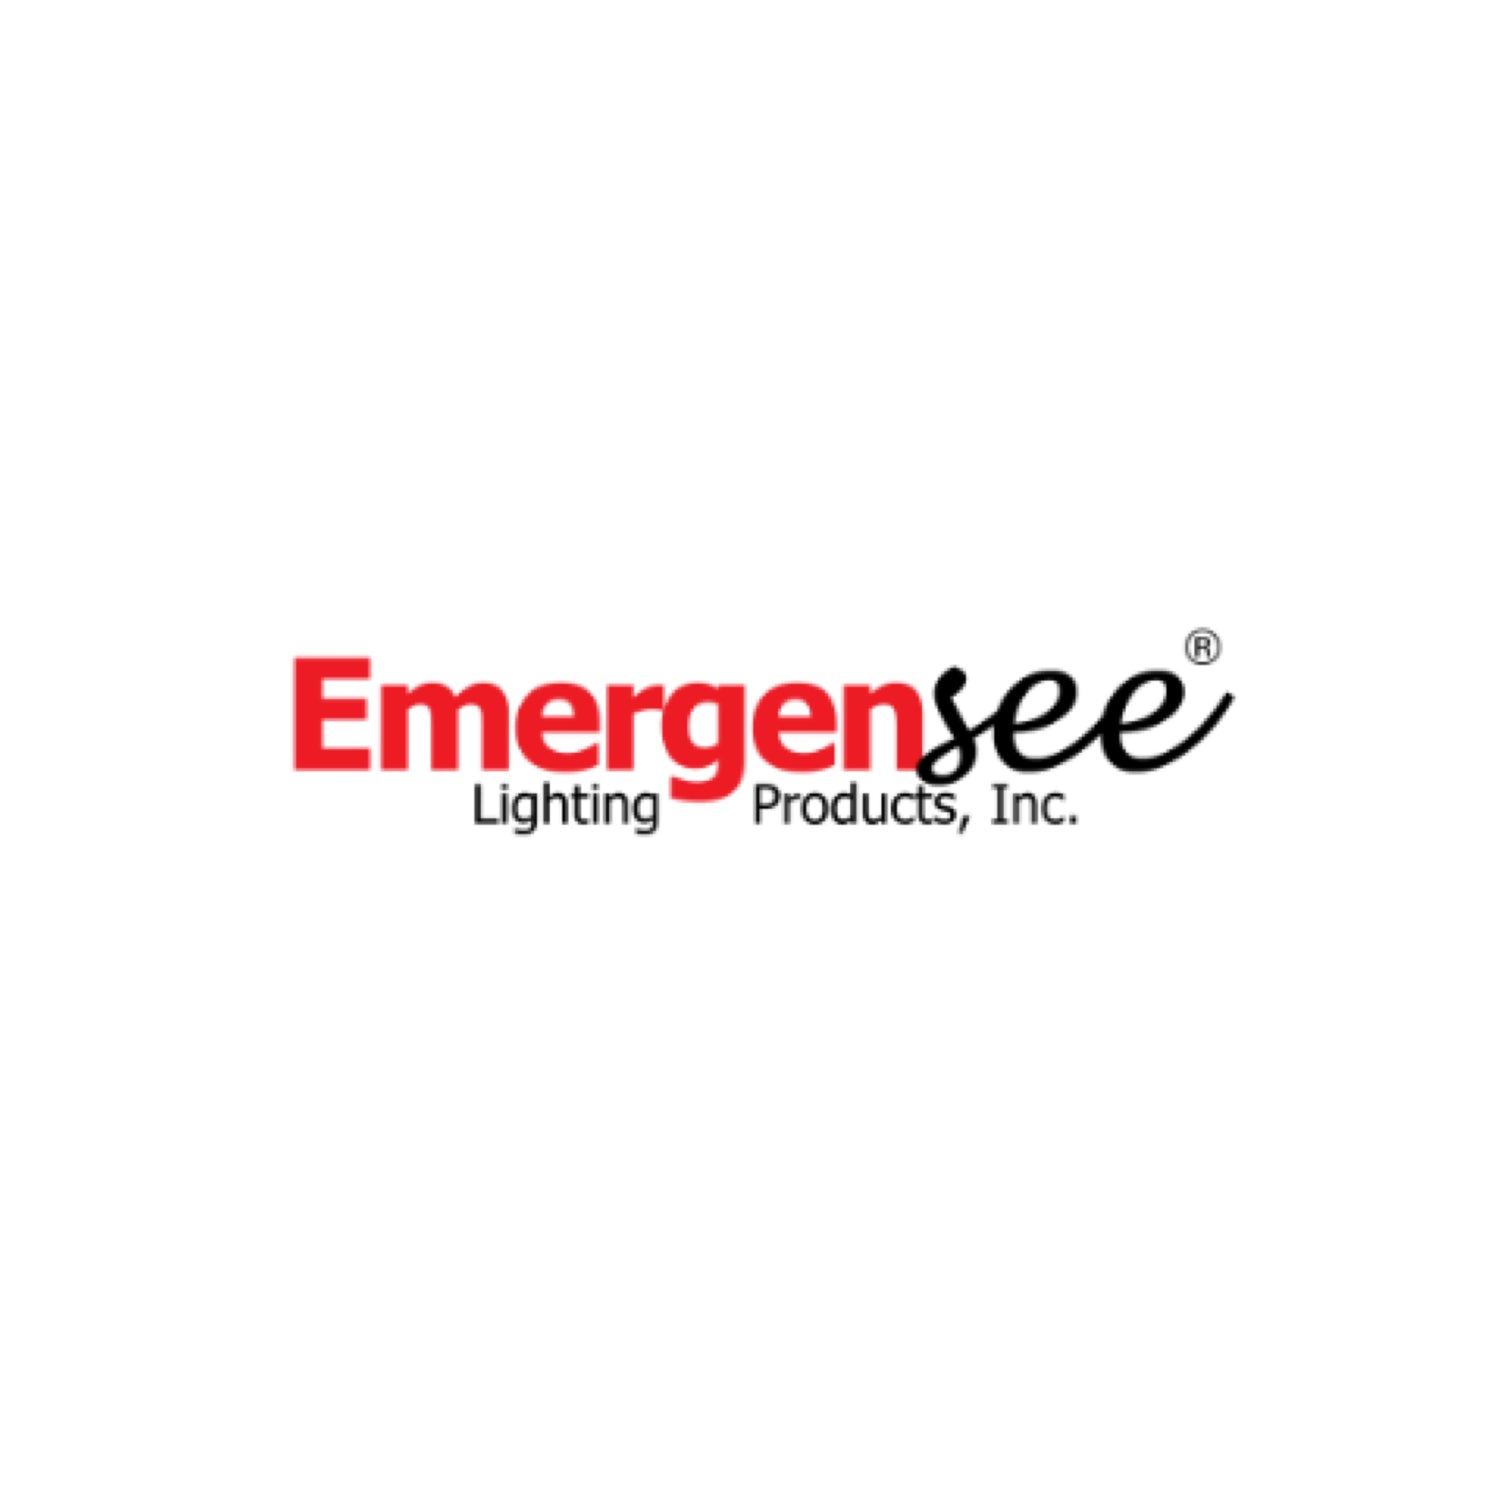 EMERGENSEE LIGHTING PRODUCTS INC.